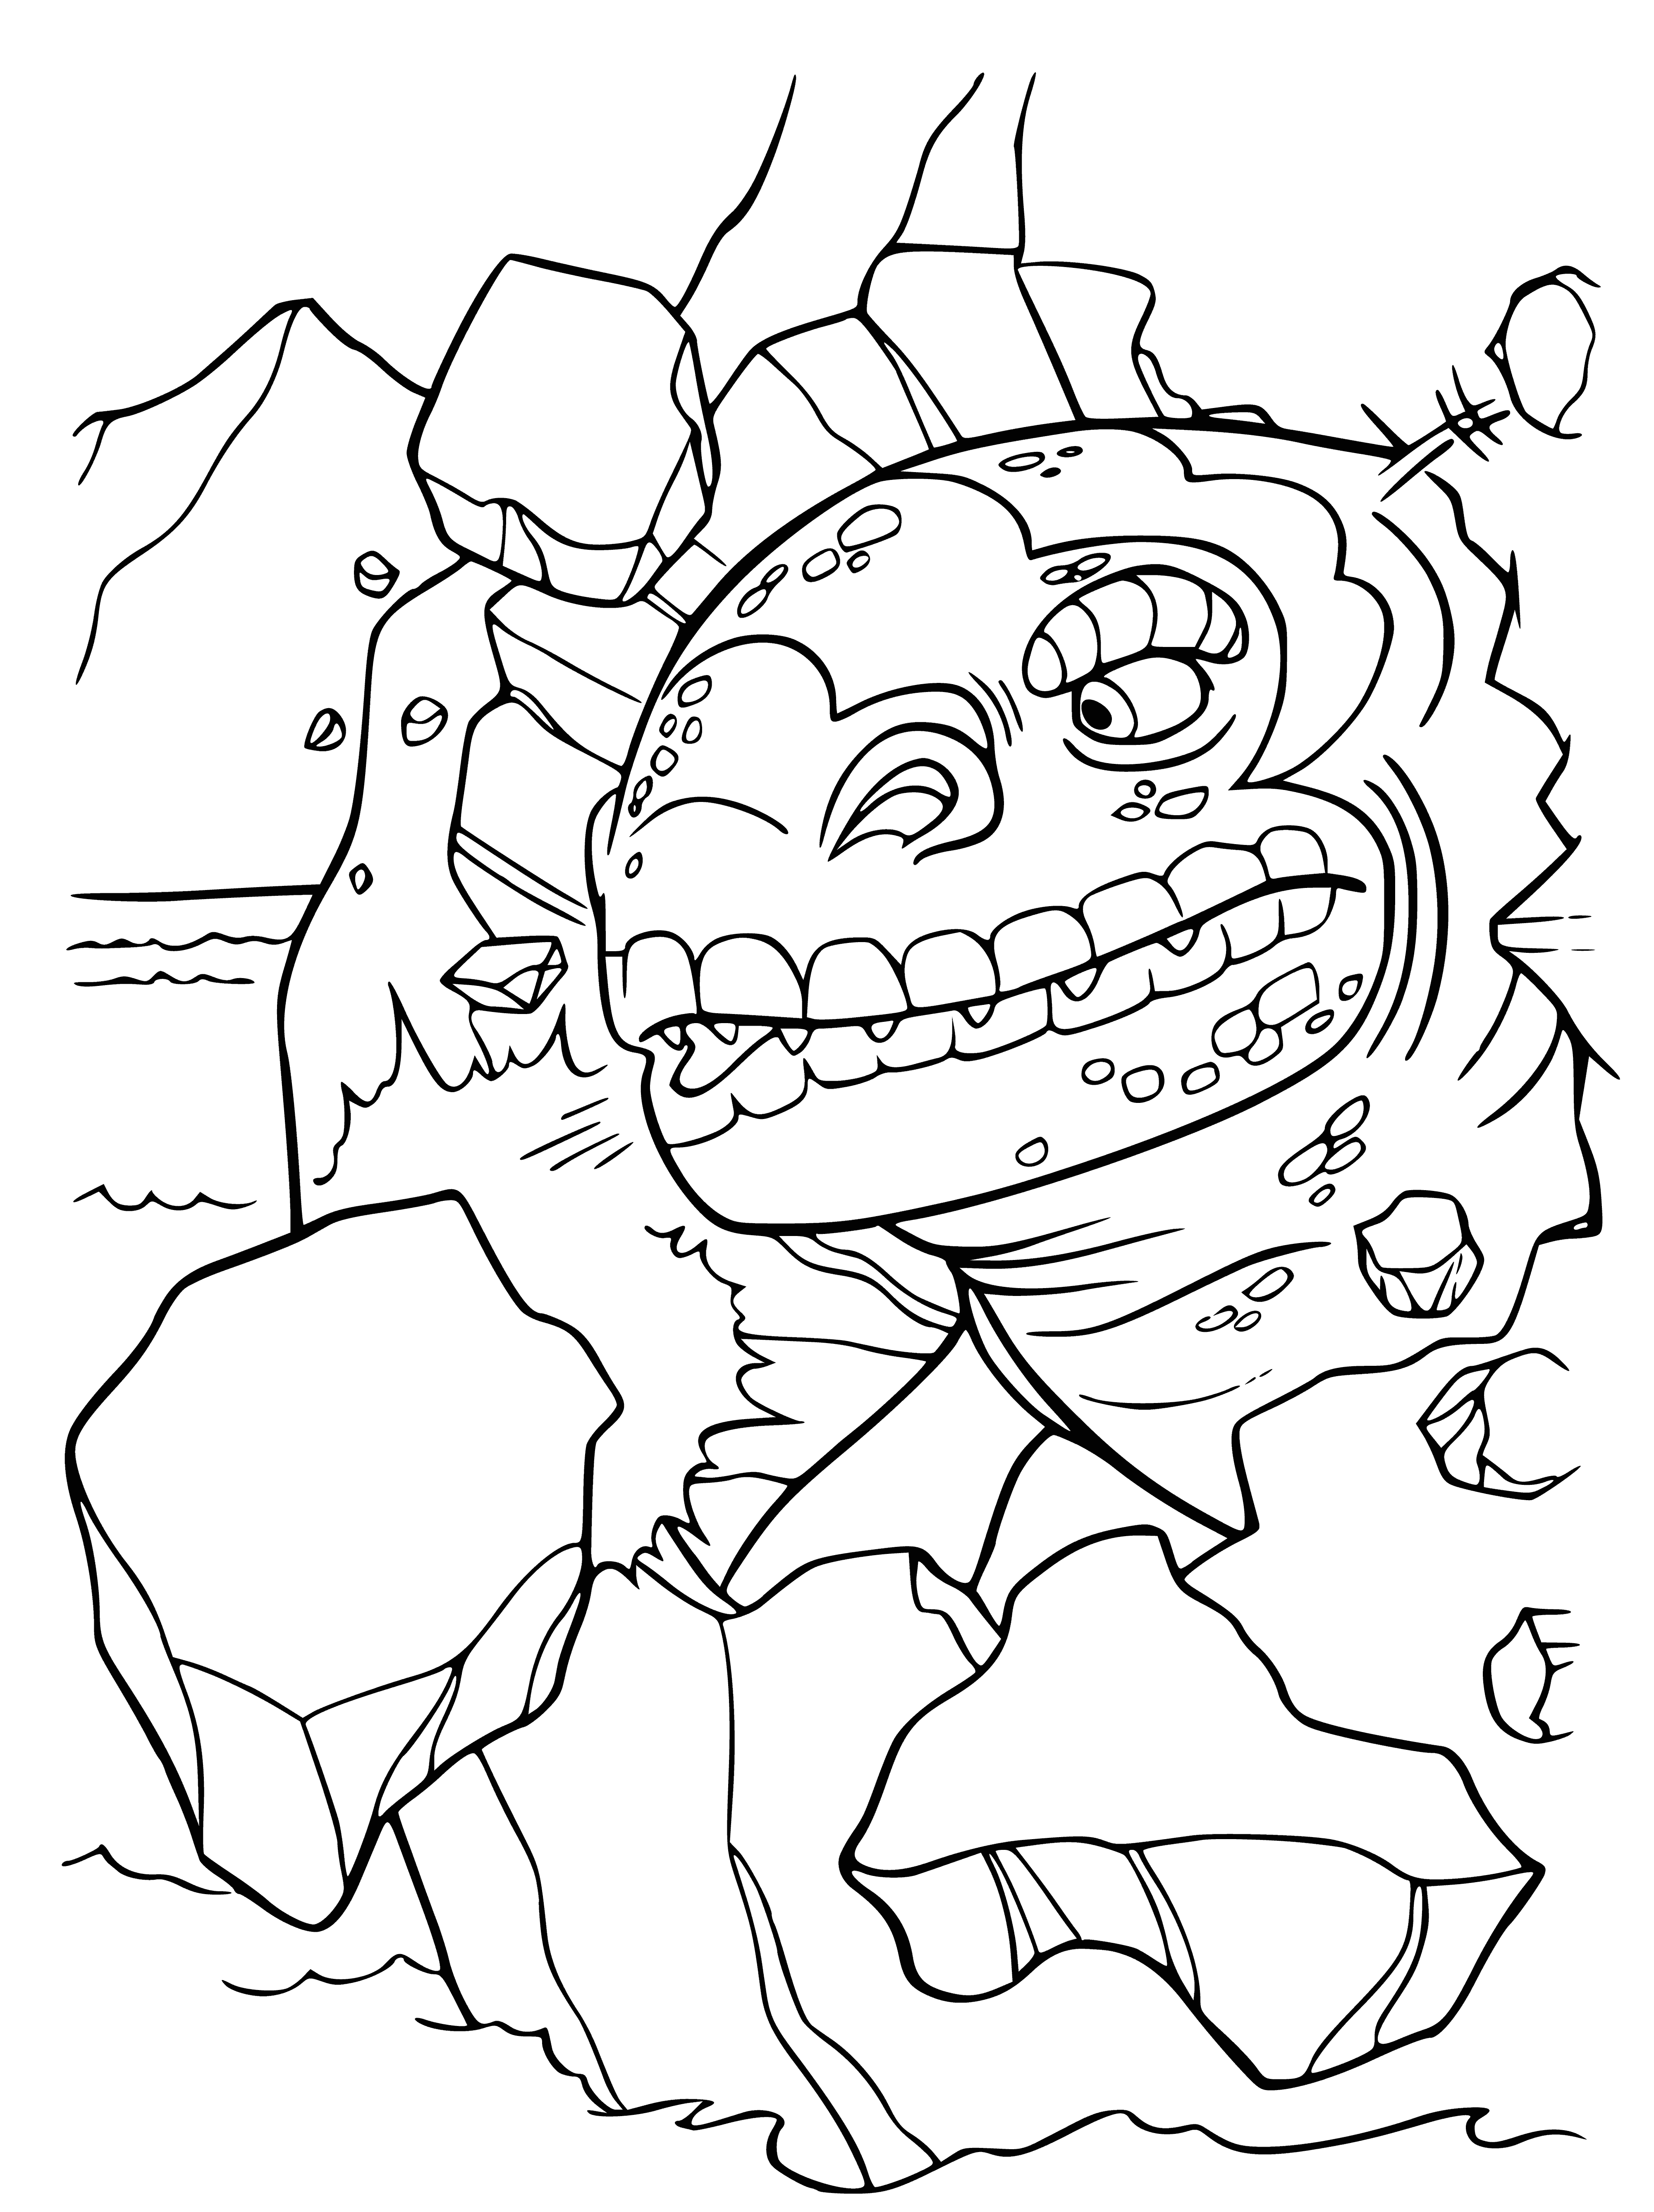 coloring page: Ice Age coloring page of large extinct reptiles from an era when Earth was colder. #history #iceage #coloring